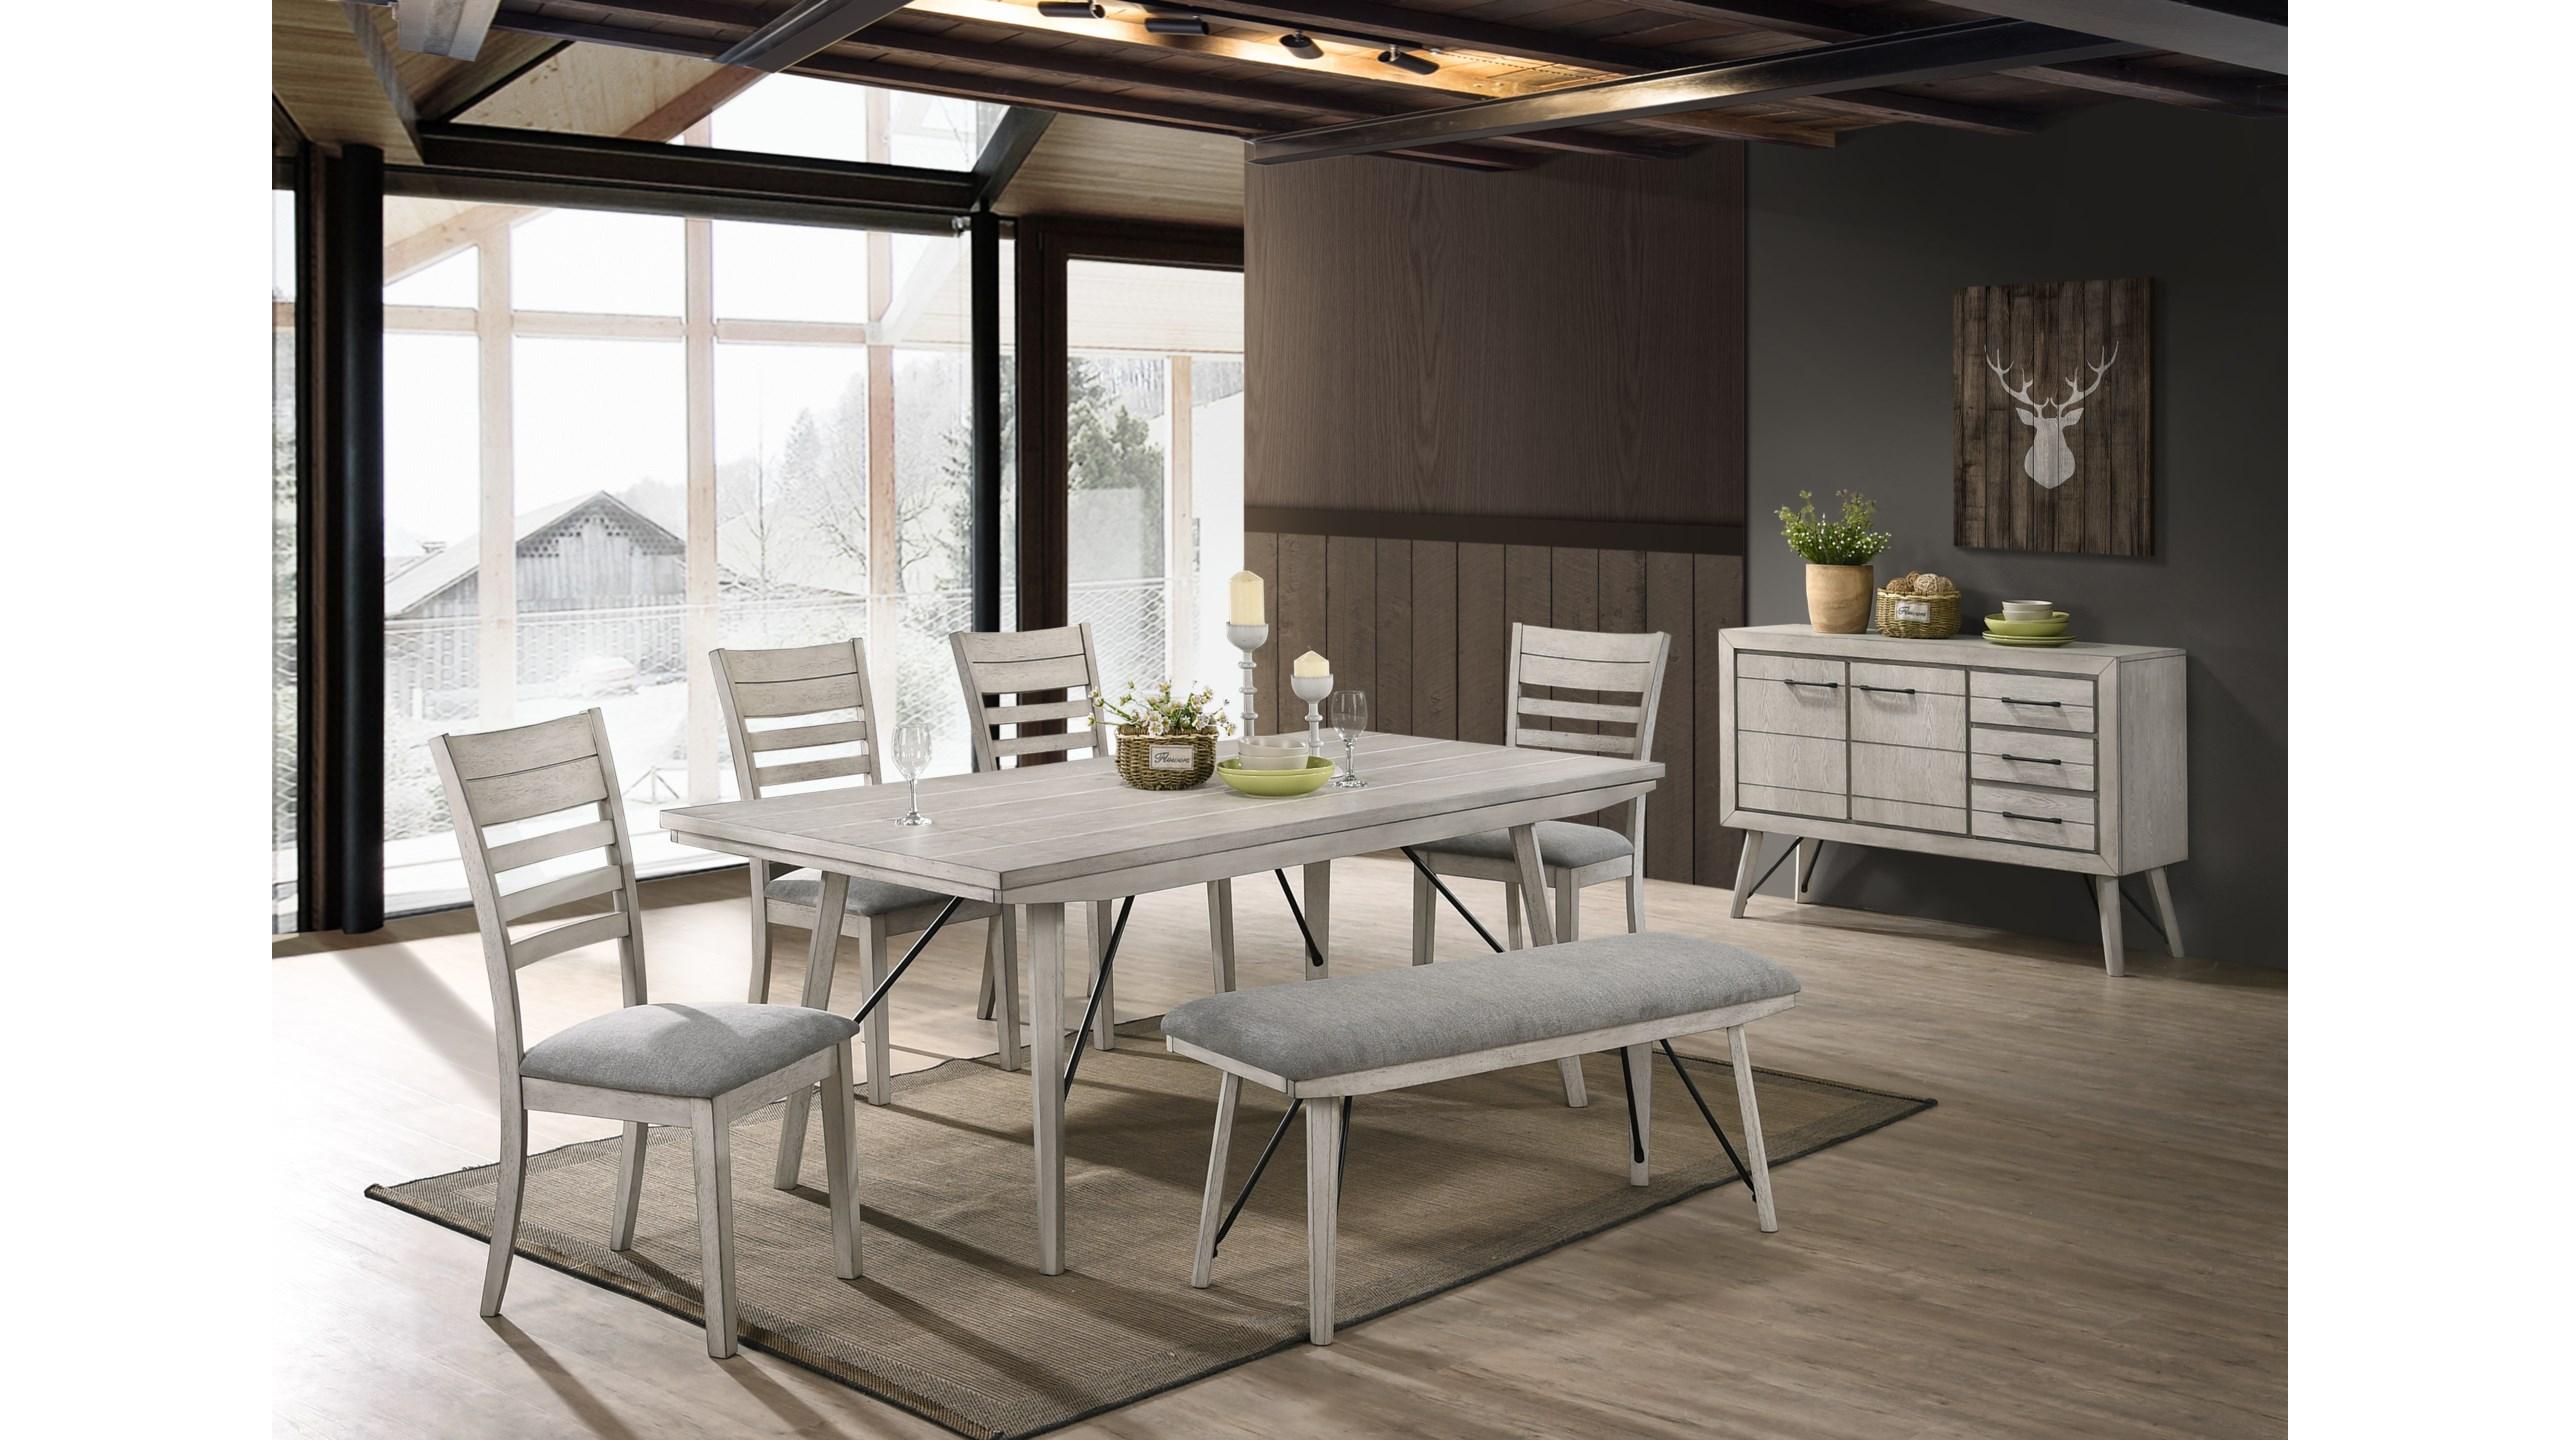 

    
Light Gray & Vintage White Dining Room Set 6Pcs w/ Bench by Crown Mark White Sands 2132T-4079-6pcs
